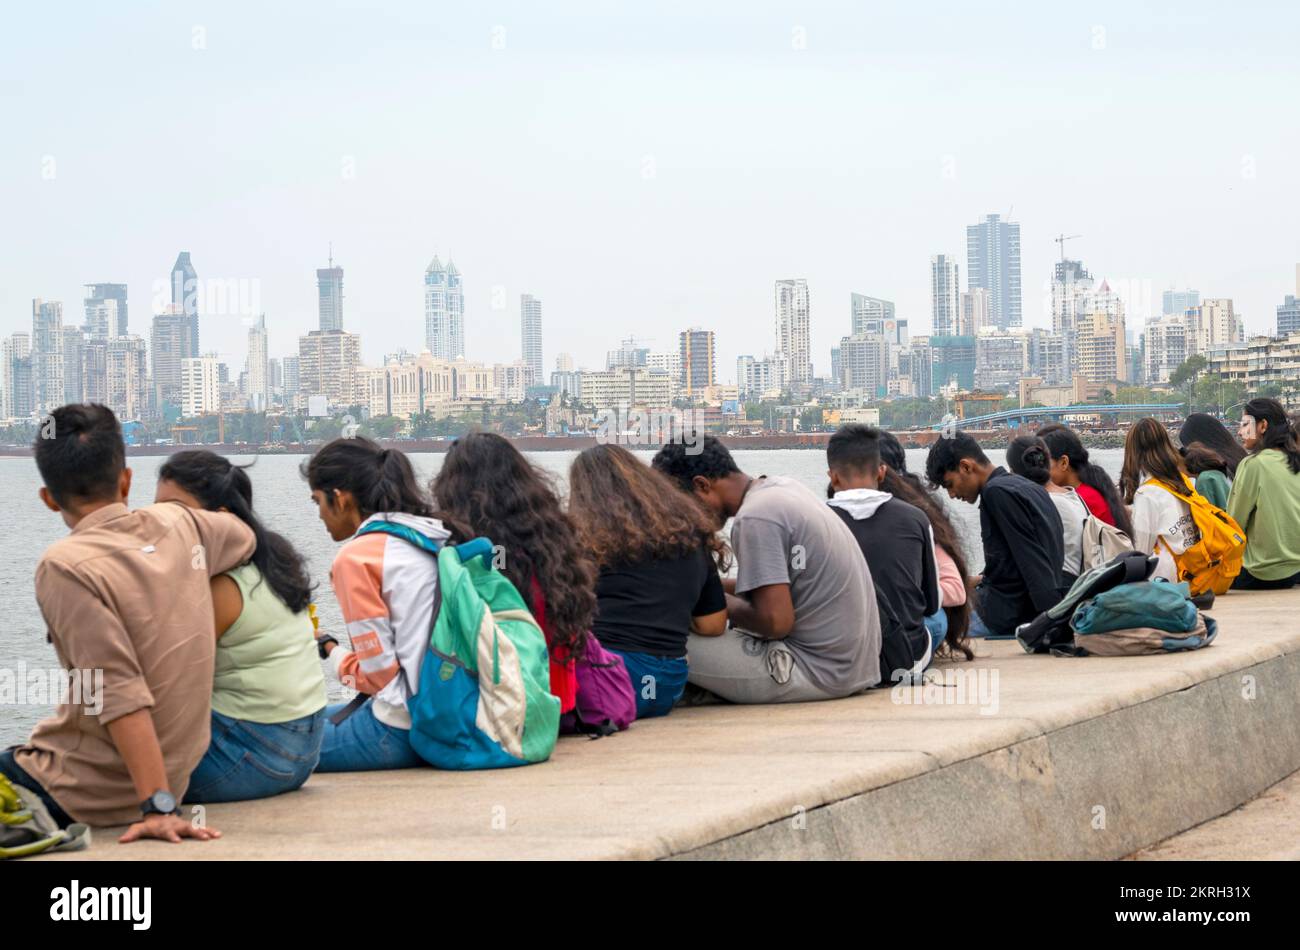 MUMBAI - SEPTEMBER 25: People sitting along the Marine Drive or Queens Necklace promenade in Mumbai on September 25. 2022 in India Stock Photo